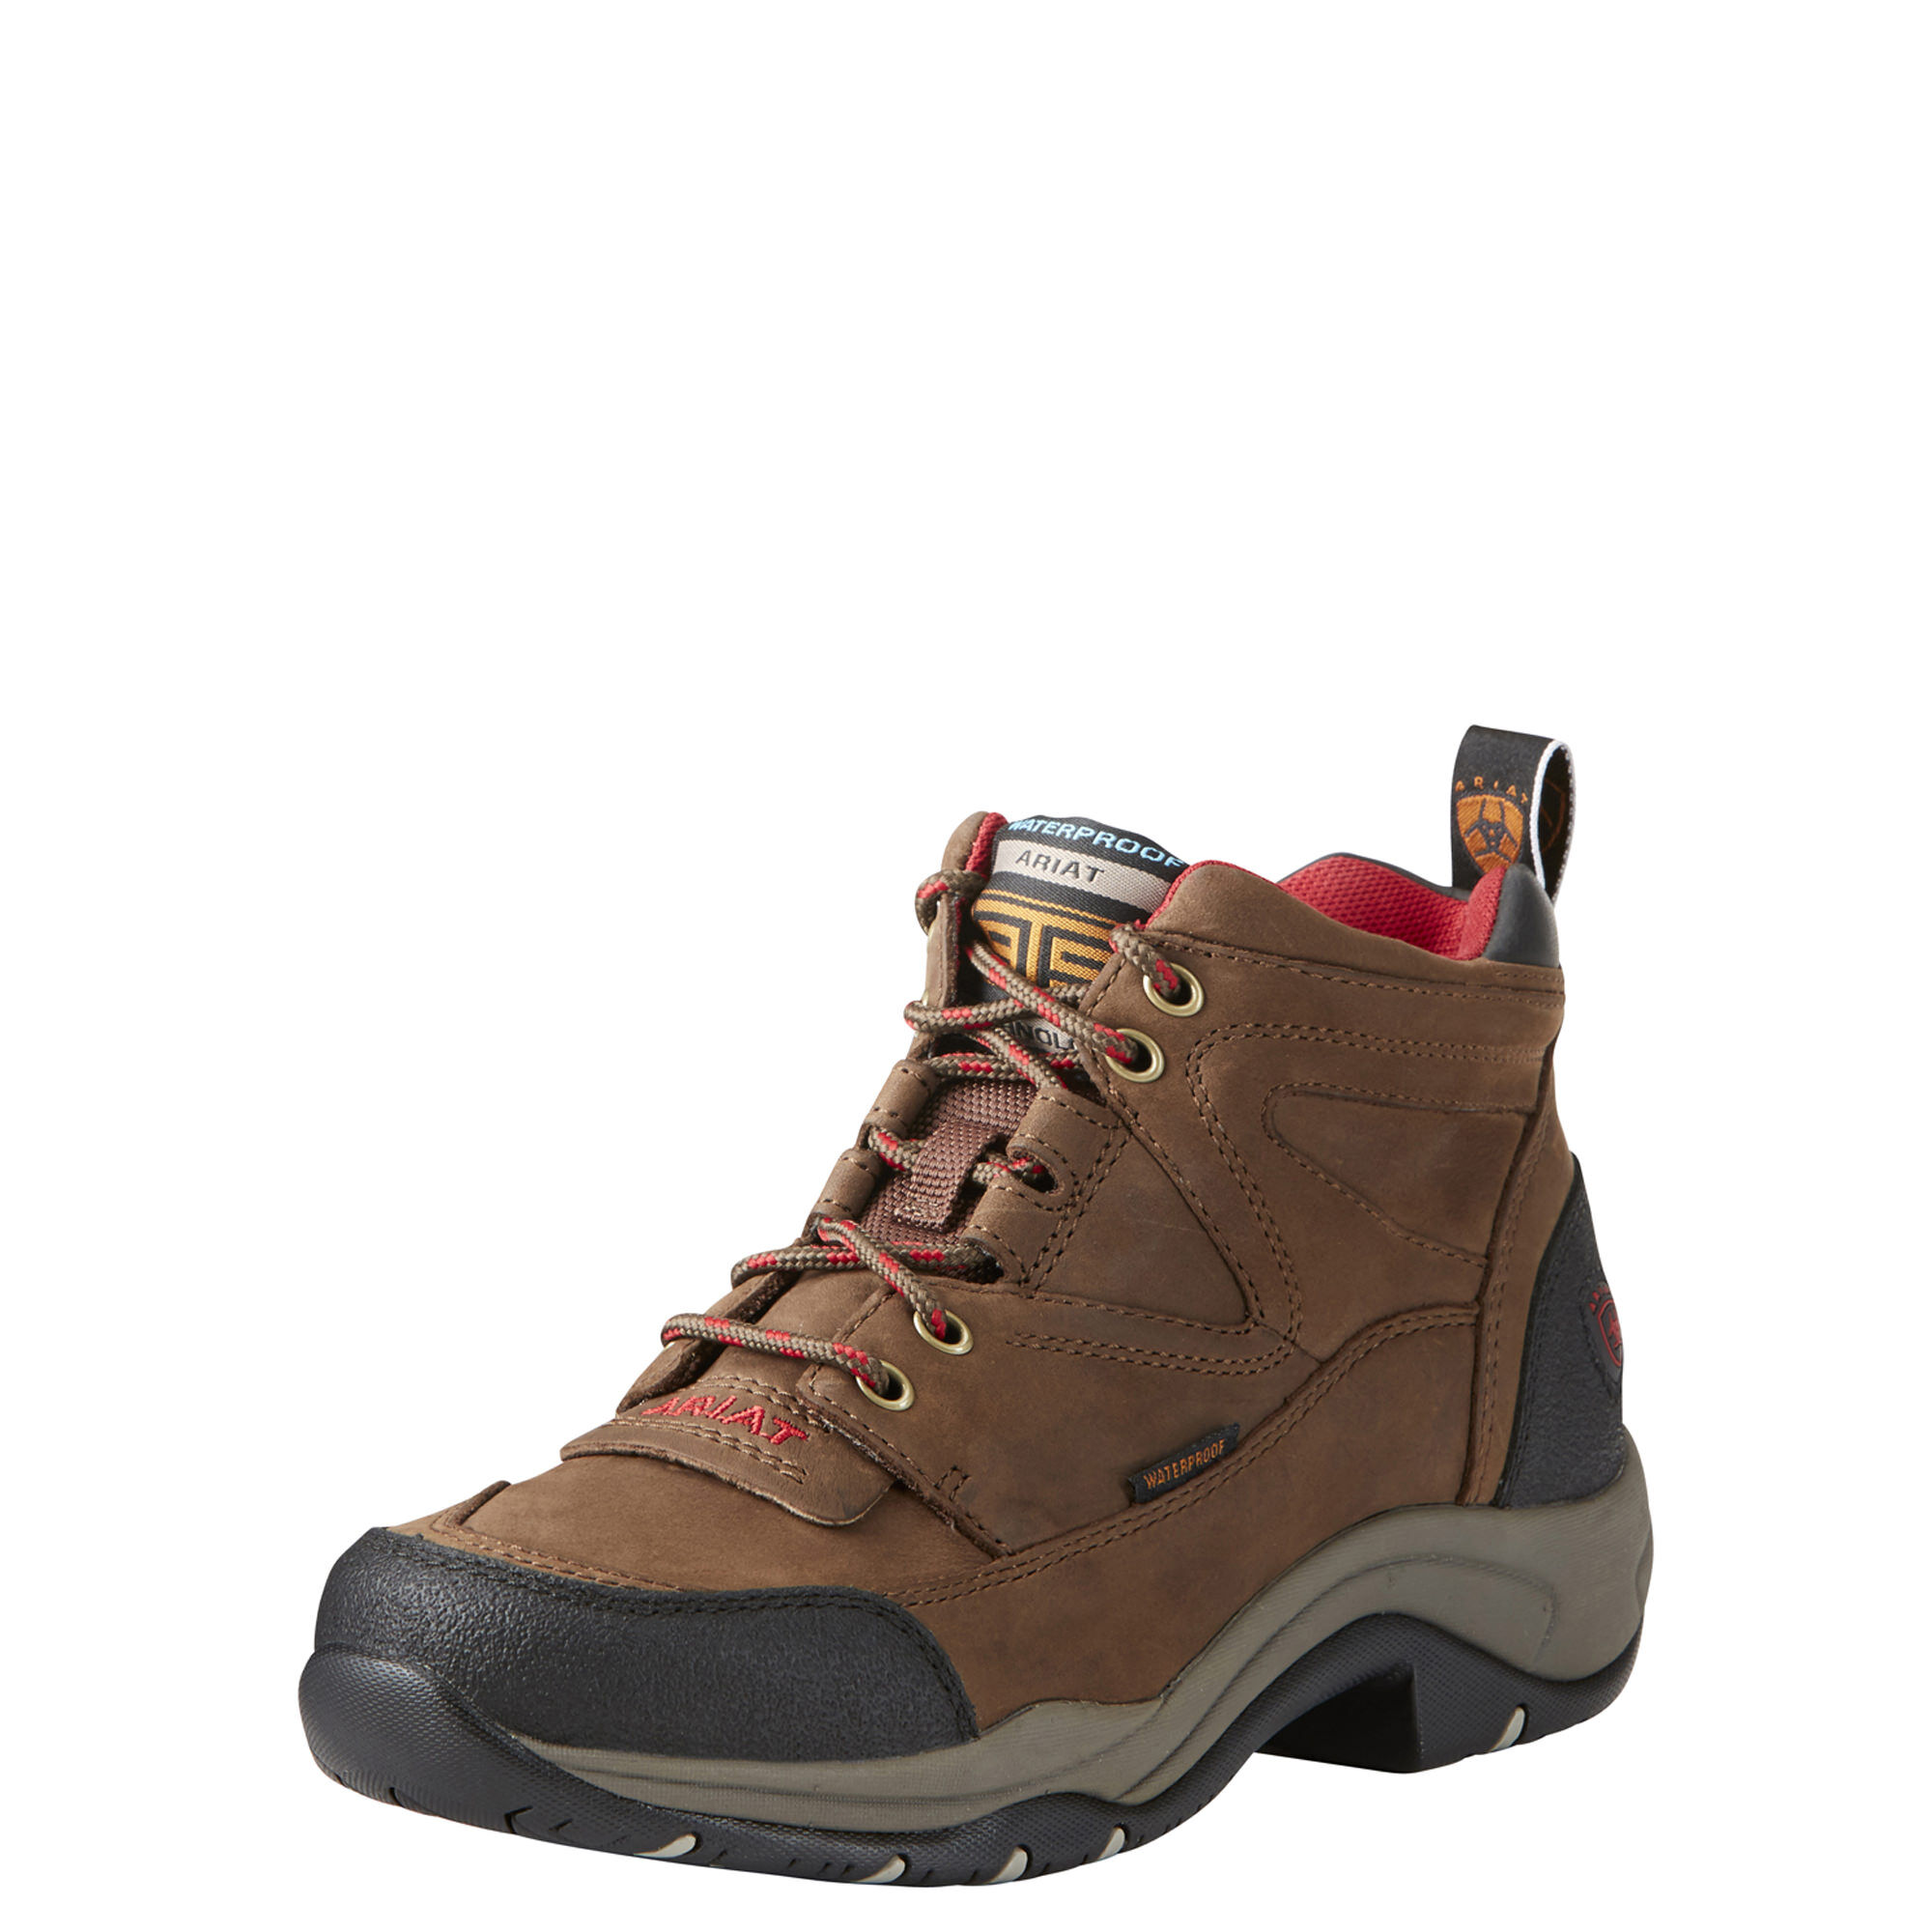   Women’s Leather Outdoor Hiking Boots Ariat Terrain Hiking Boot 